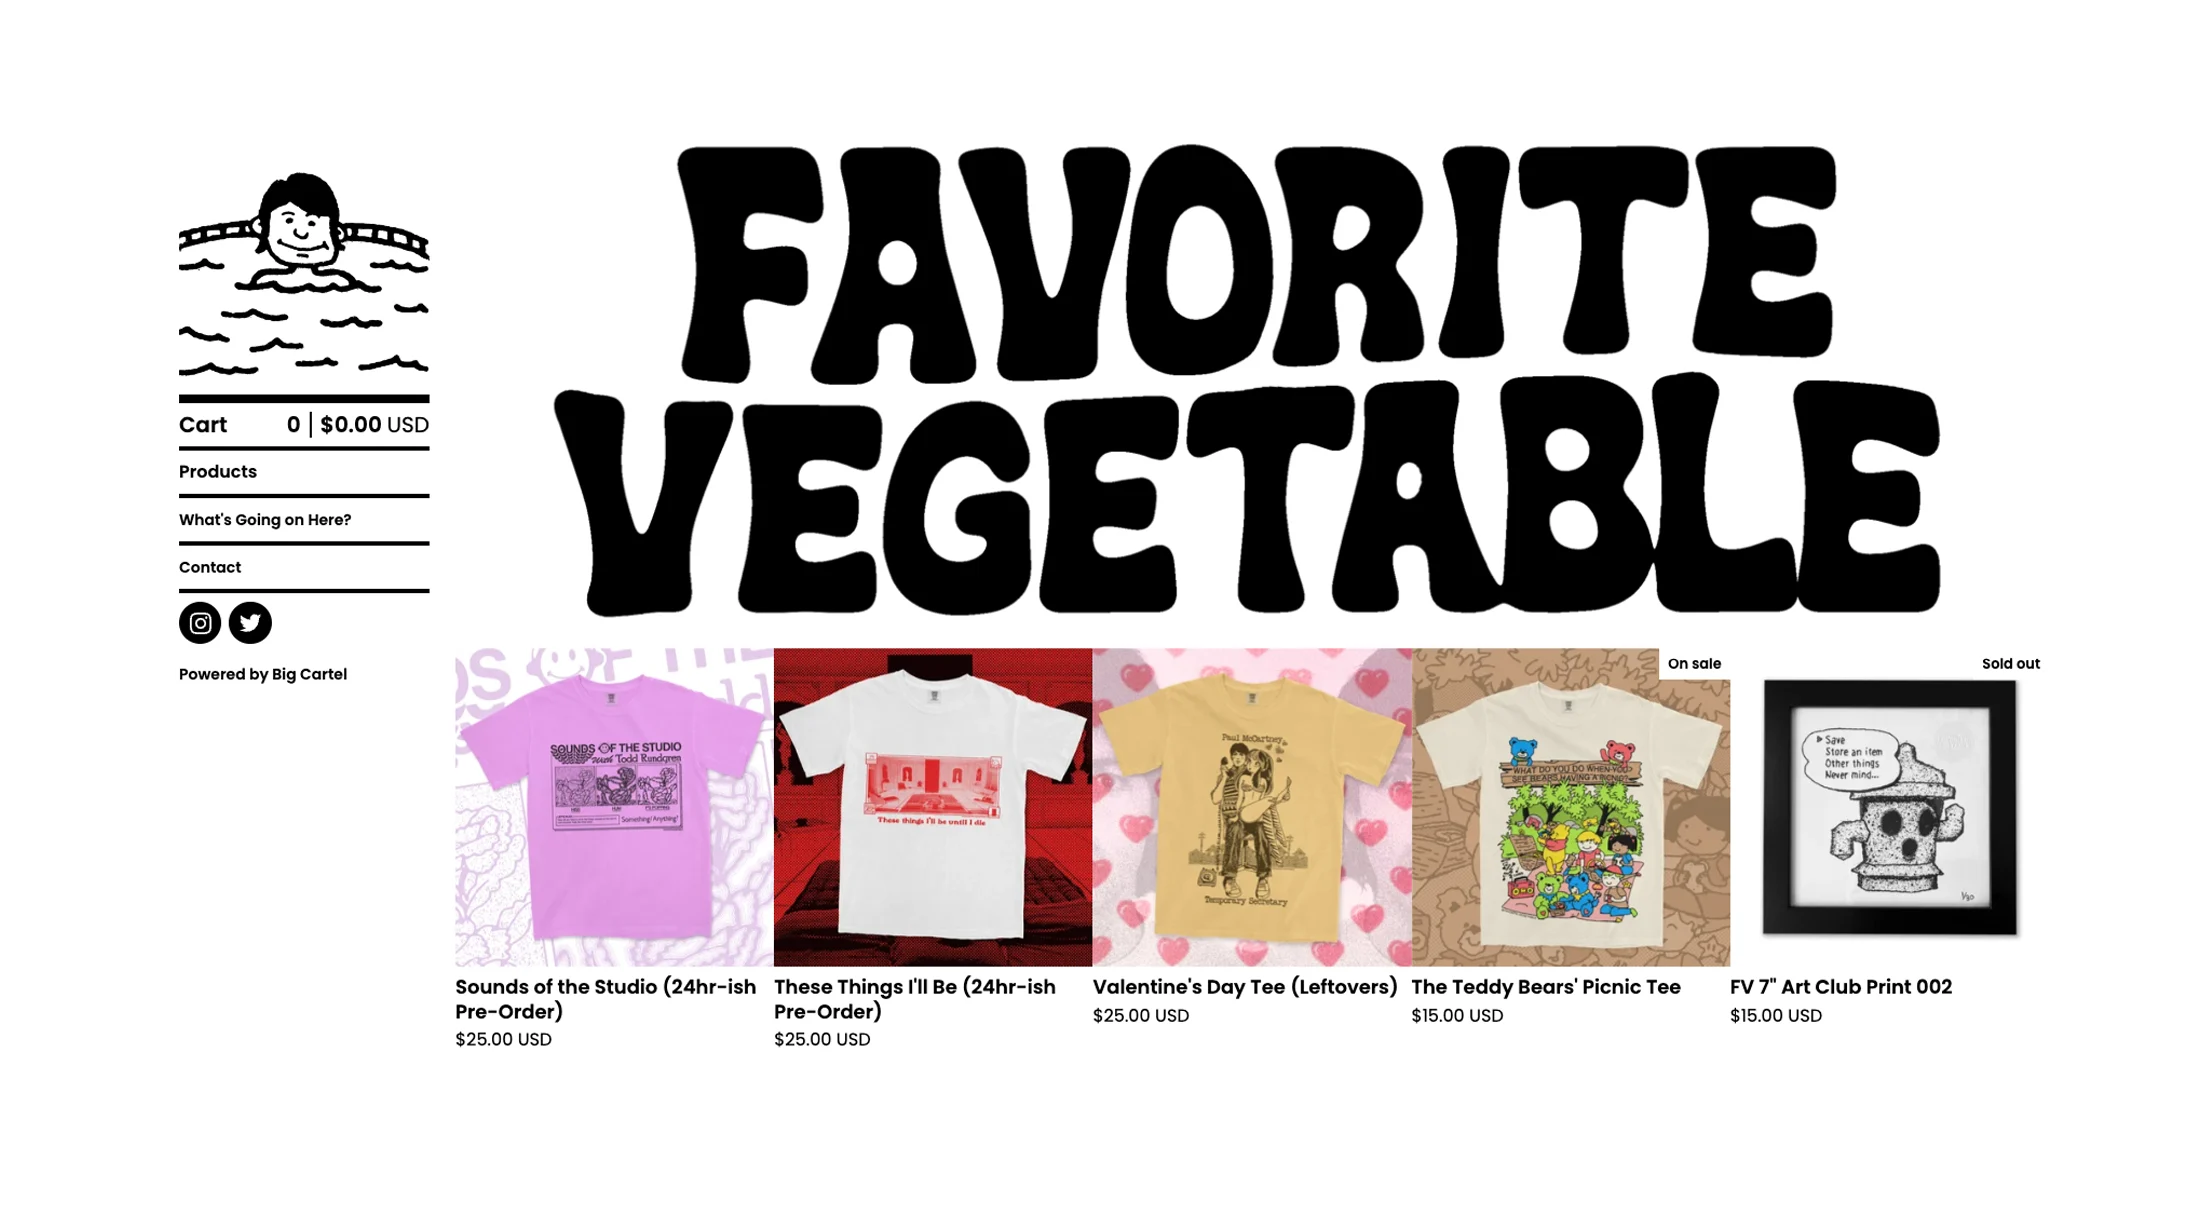 Design of the Store of Favorite Vegetable